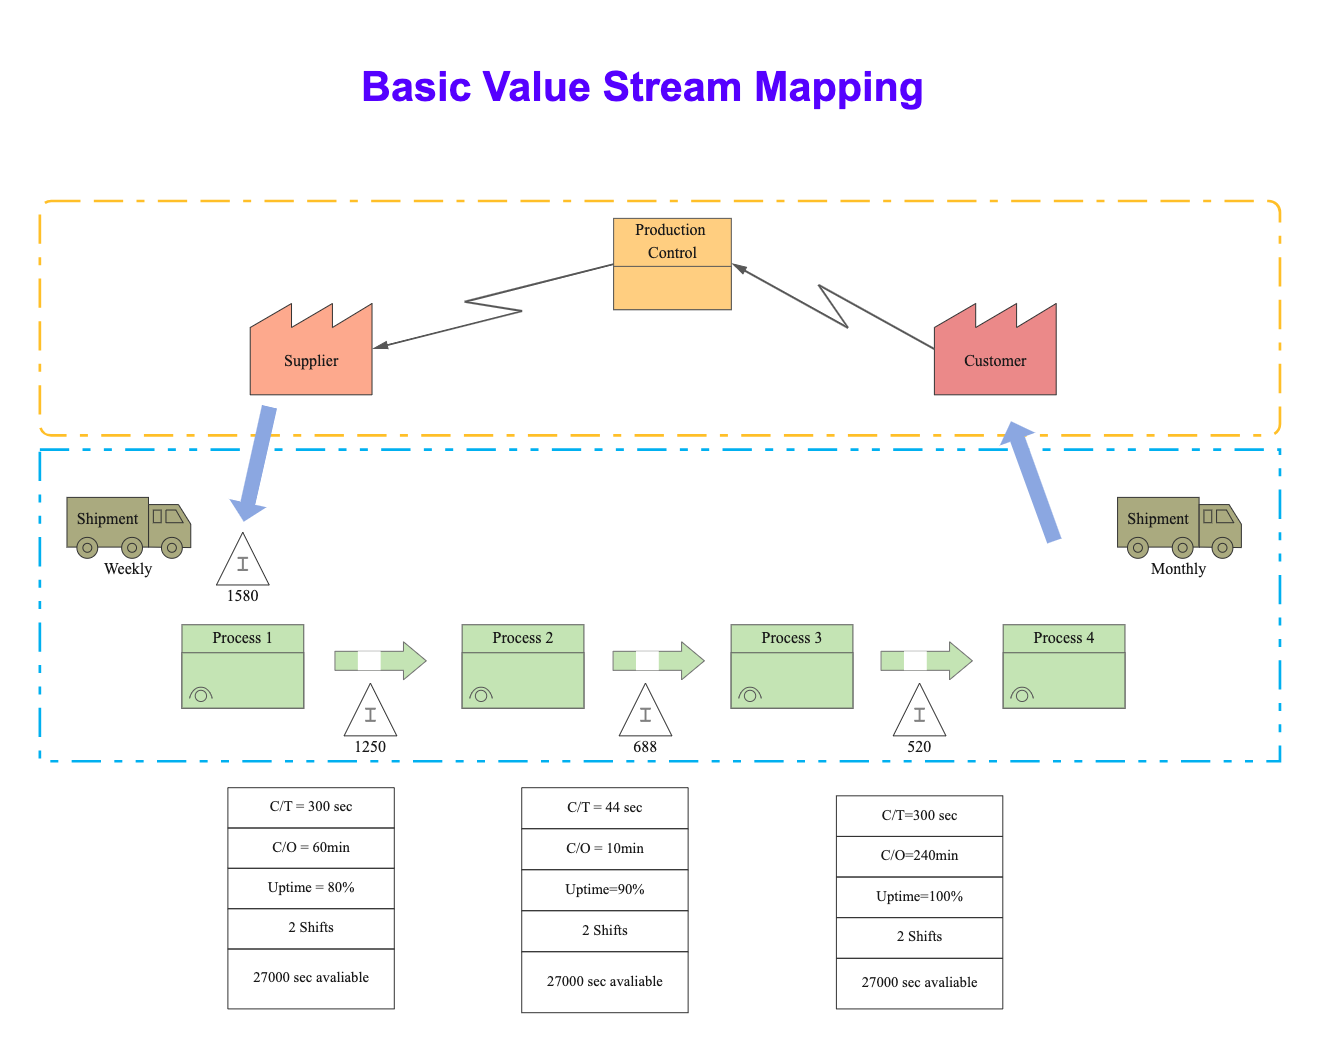 Basic Value Stream Mapping Example